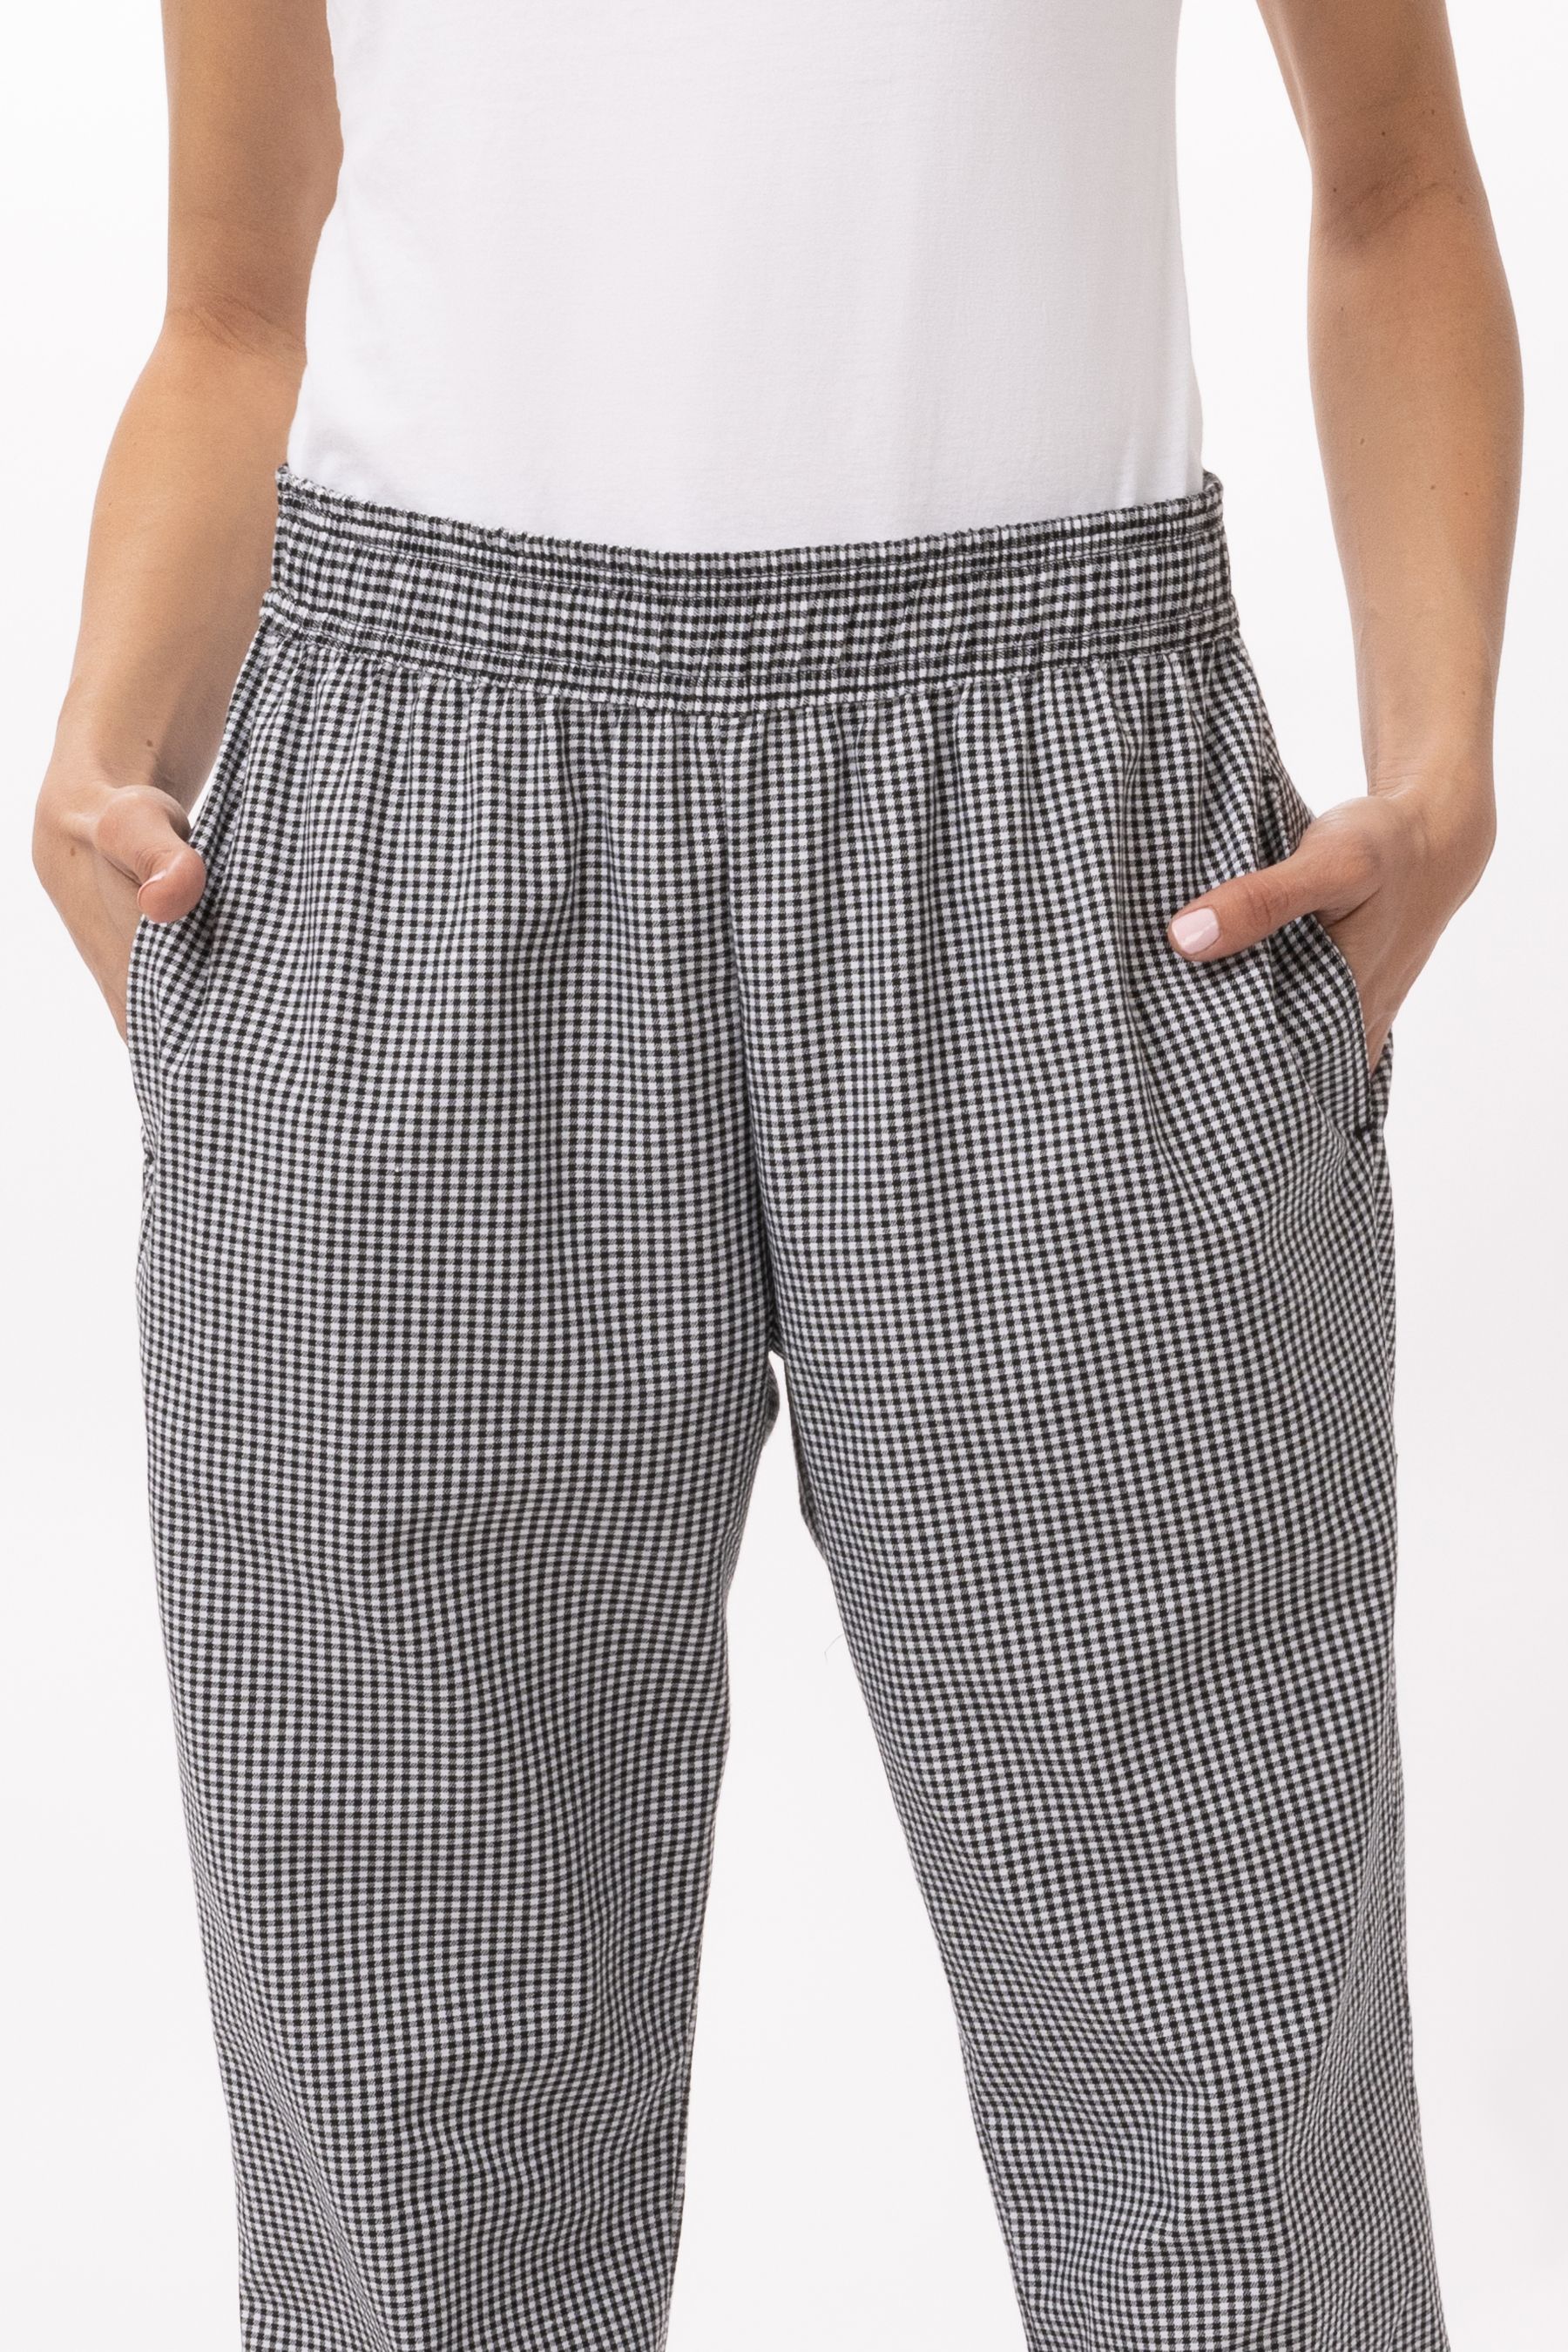 Essential Chef Pants